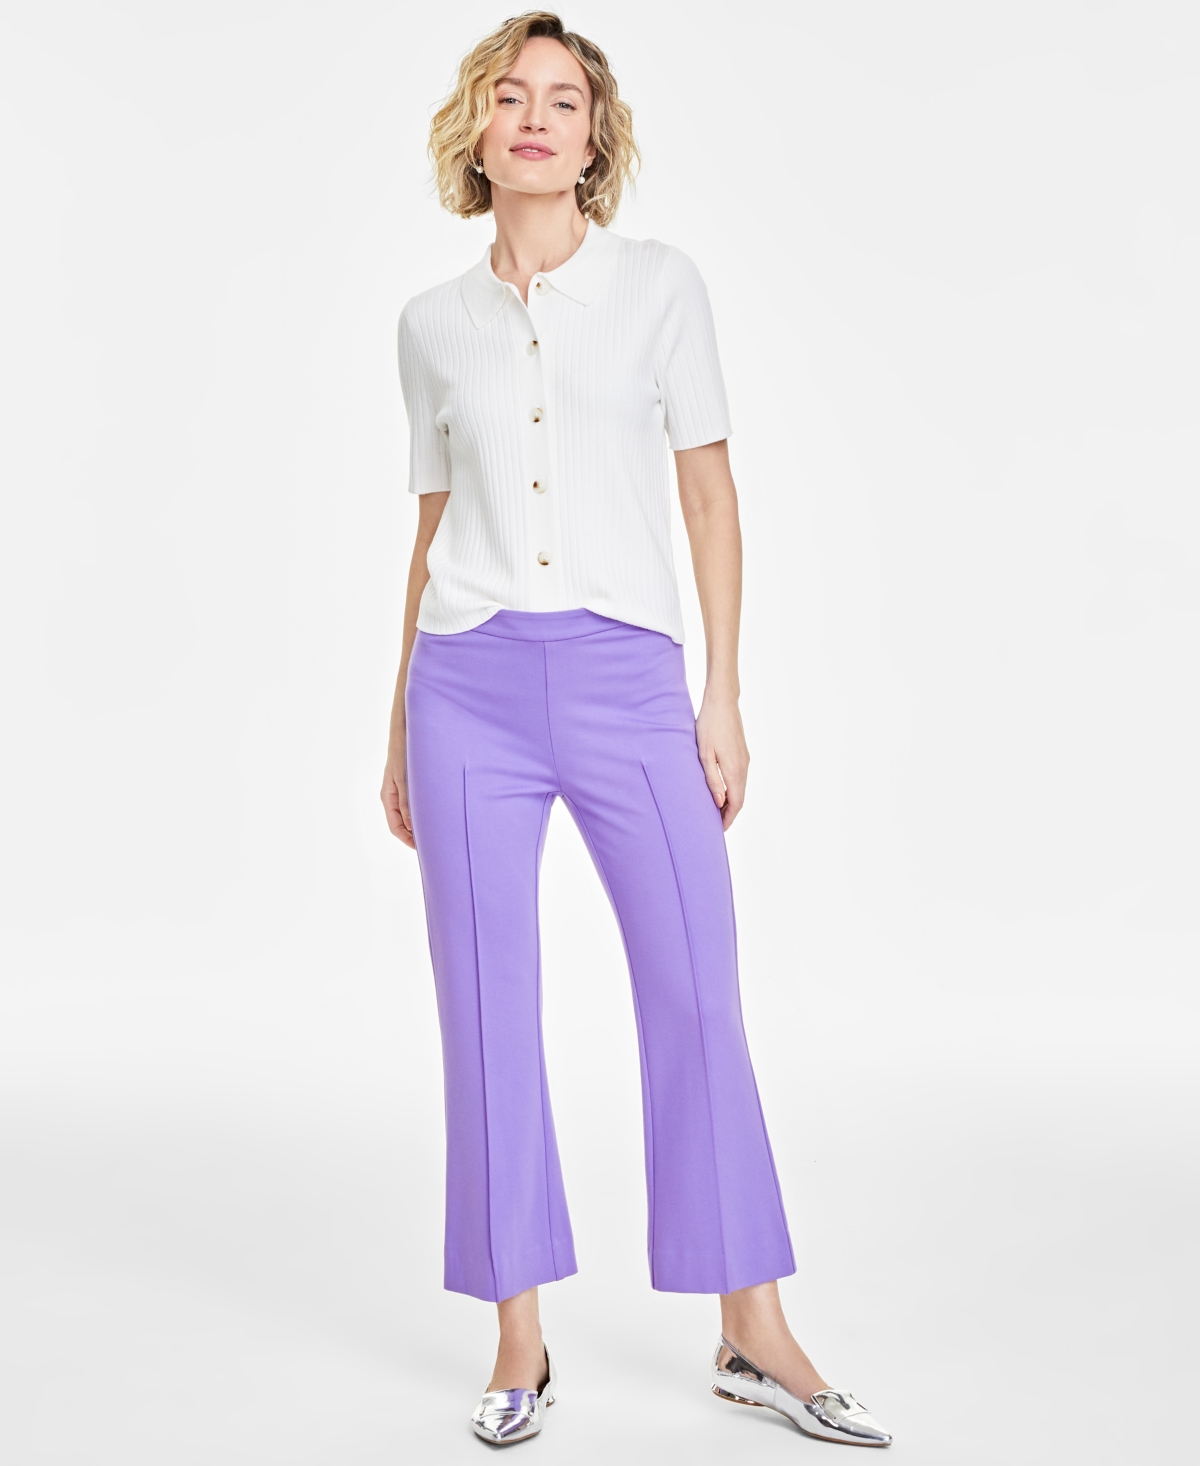 Women's Ponte Kick-Flare Ankle Pants, Regular and Short Lengths, Created for Macy's - Jazzy Pink